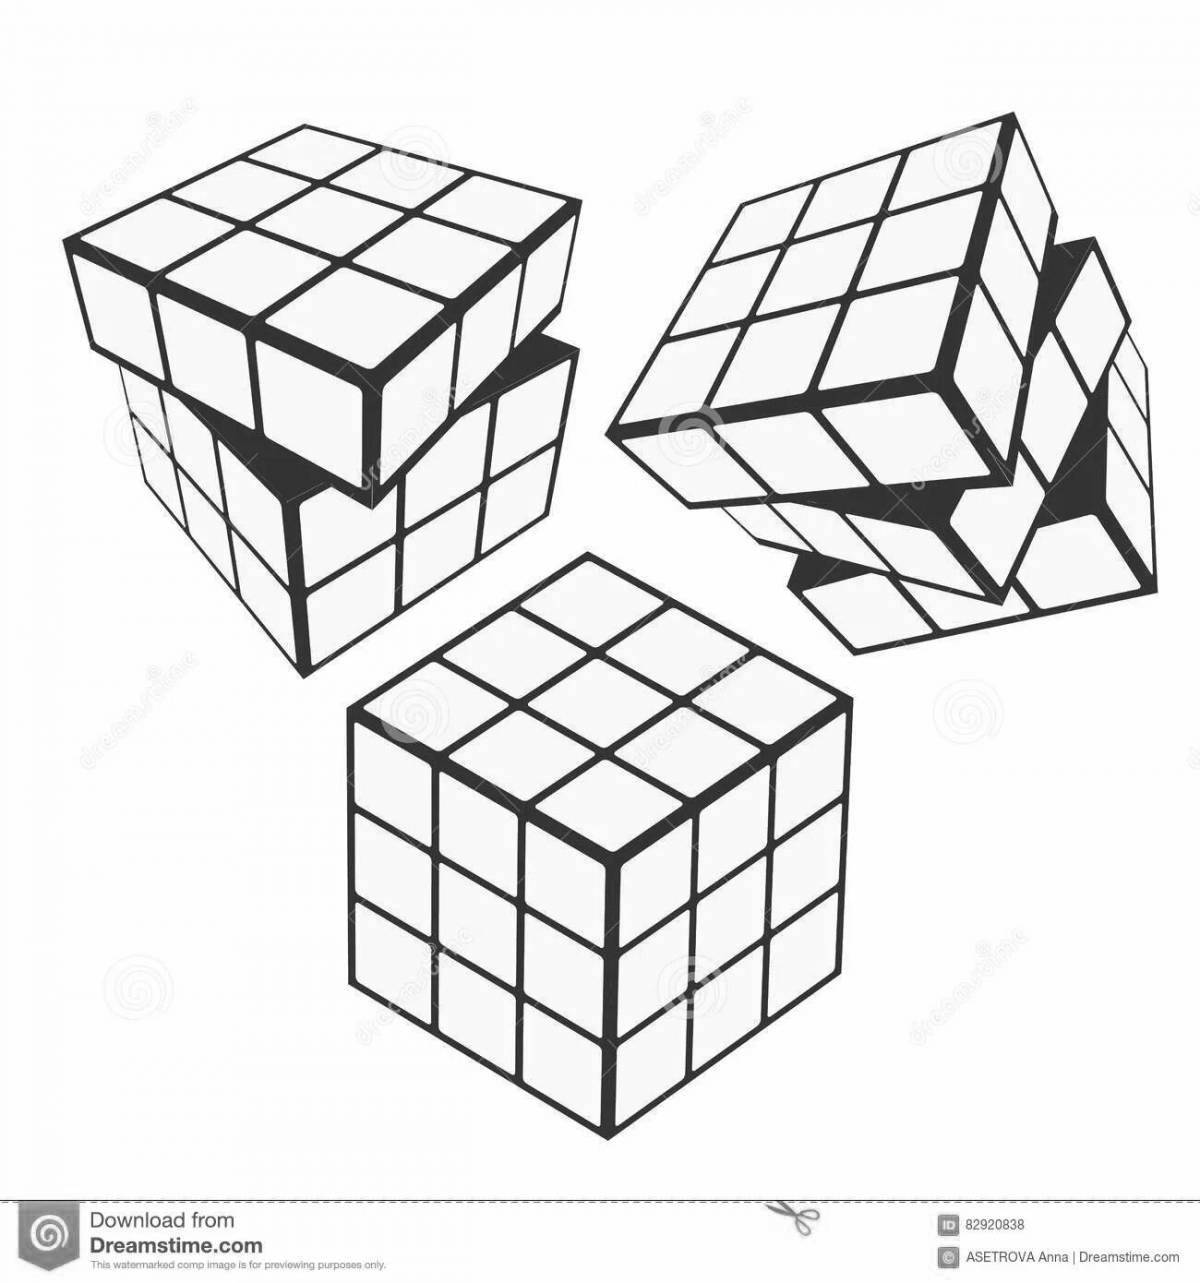 Colorful rubik's cube coloring page for kids